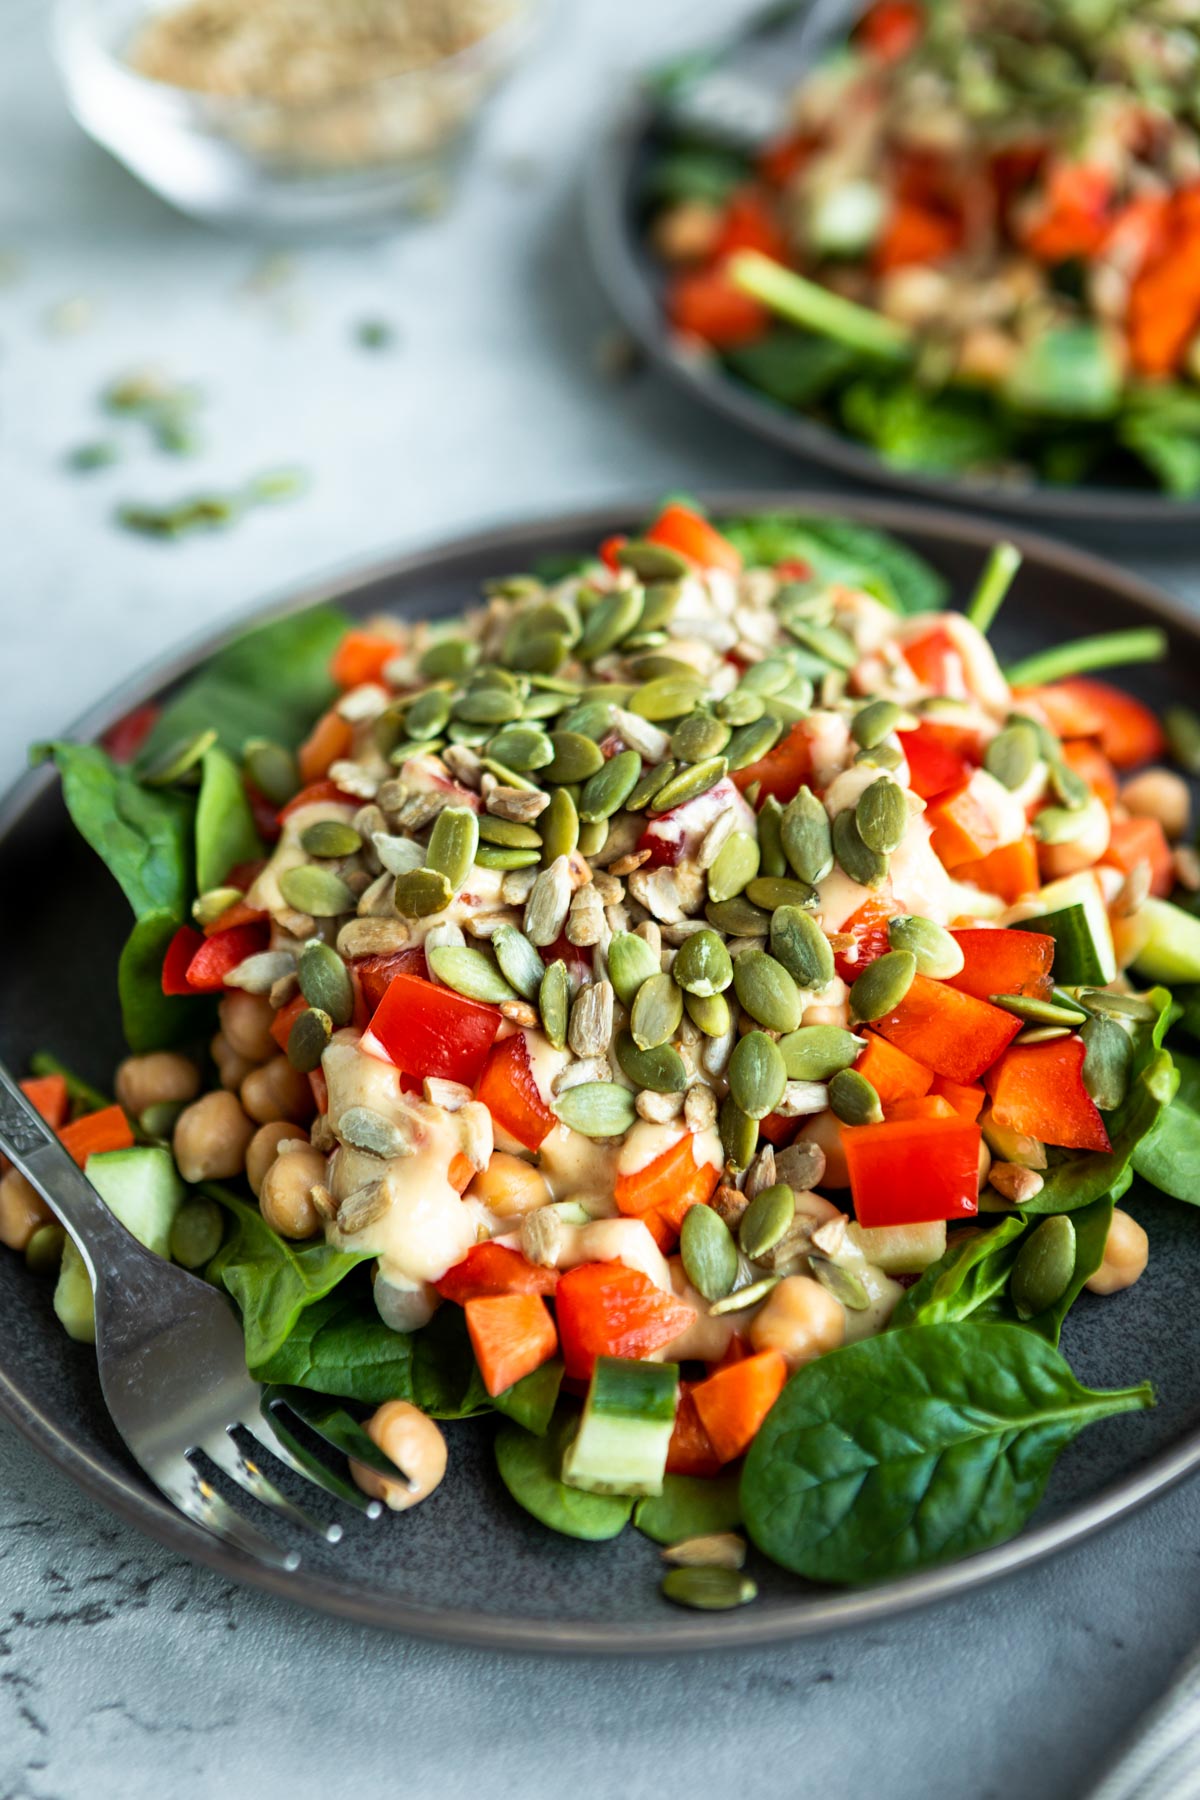 crunchy chickpea salad with spinach, chickpeas, pepitas and vegetables